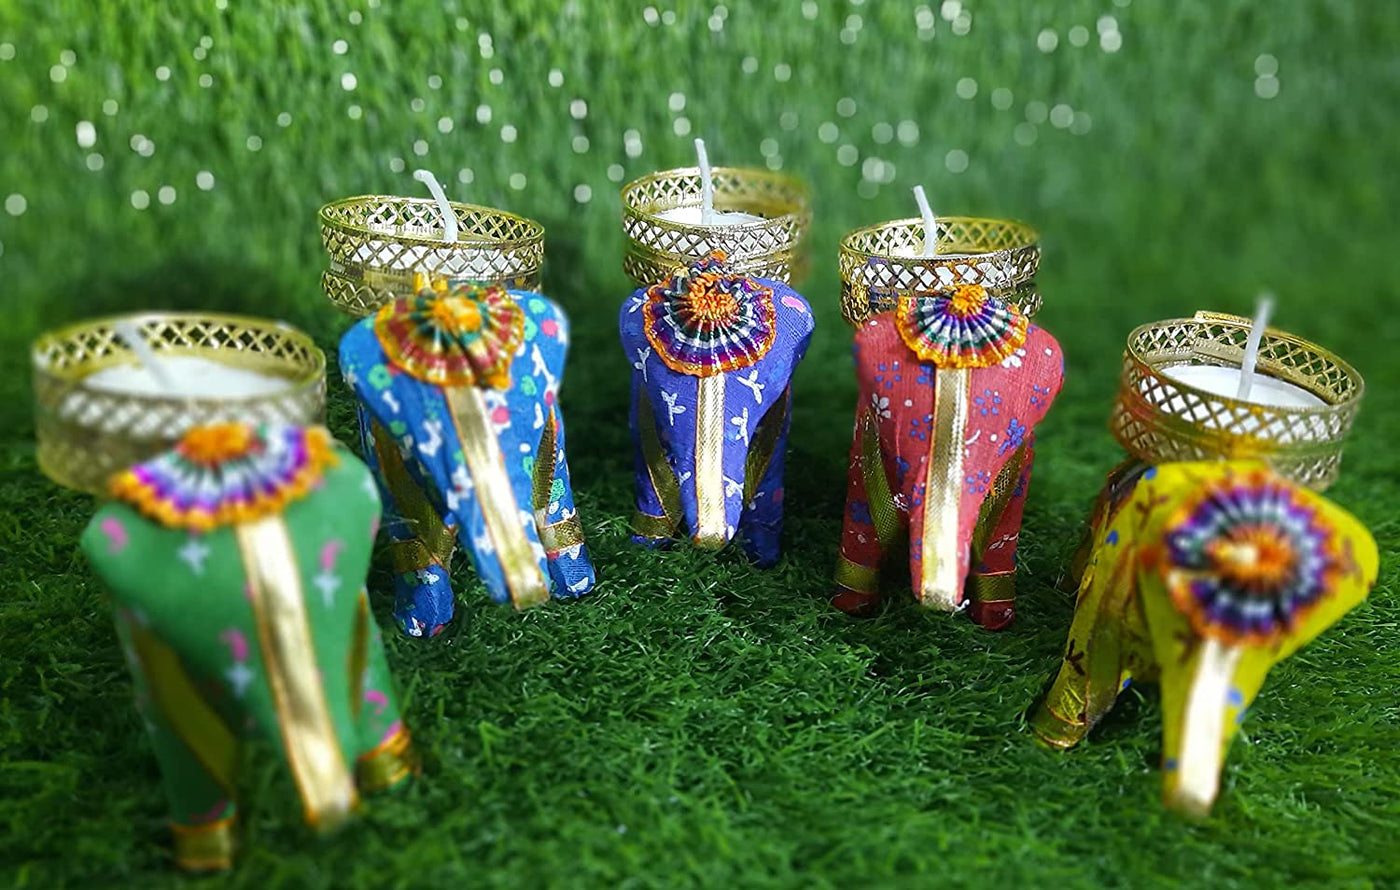 LAMANSH Elephant Tea Light Holder Multicolor / Wood / 6 LAMANSH® Pack of 6 Elephant T-Lights Candle Holder Stand with Wax Candles for Home Decor Diwali Festival Decoration Diwali Gifts